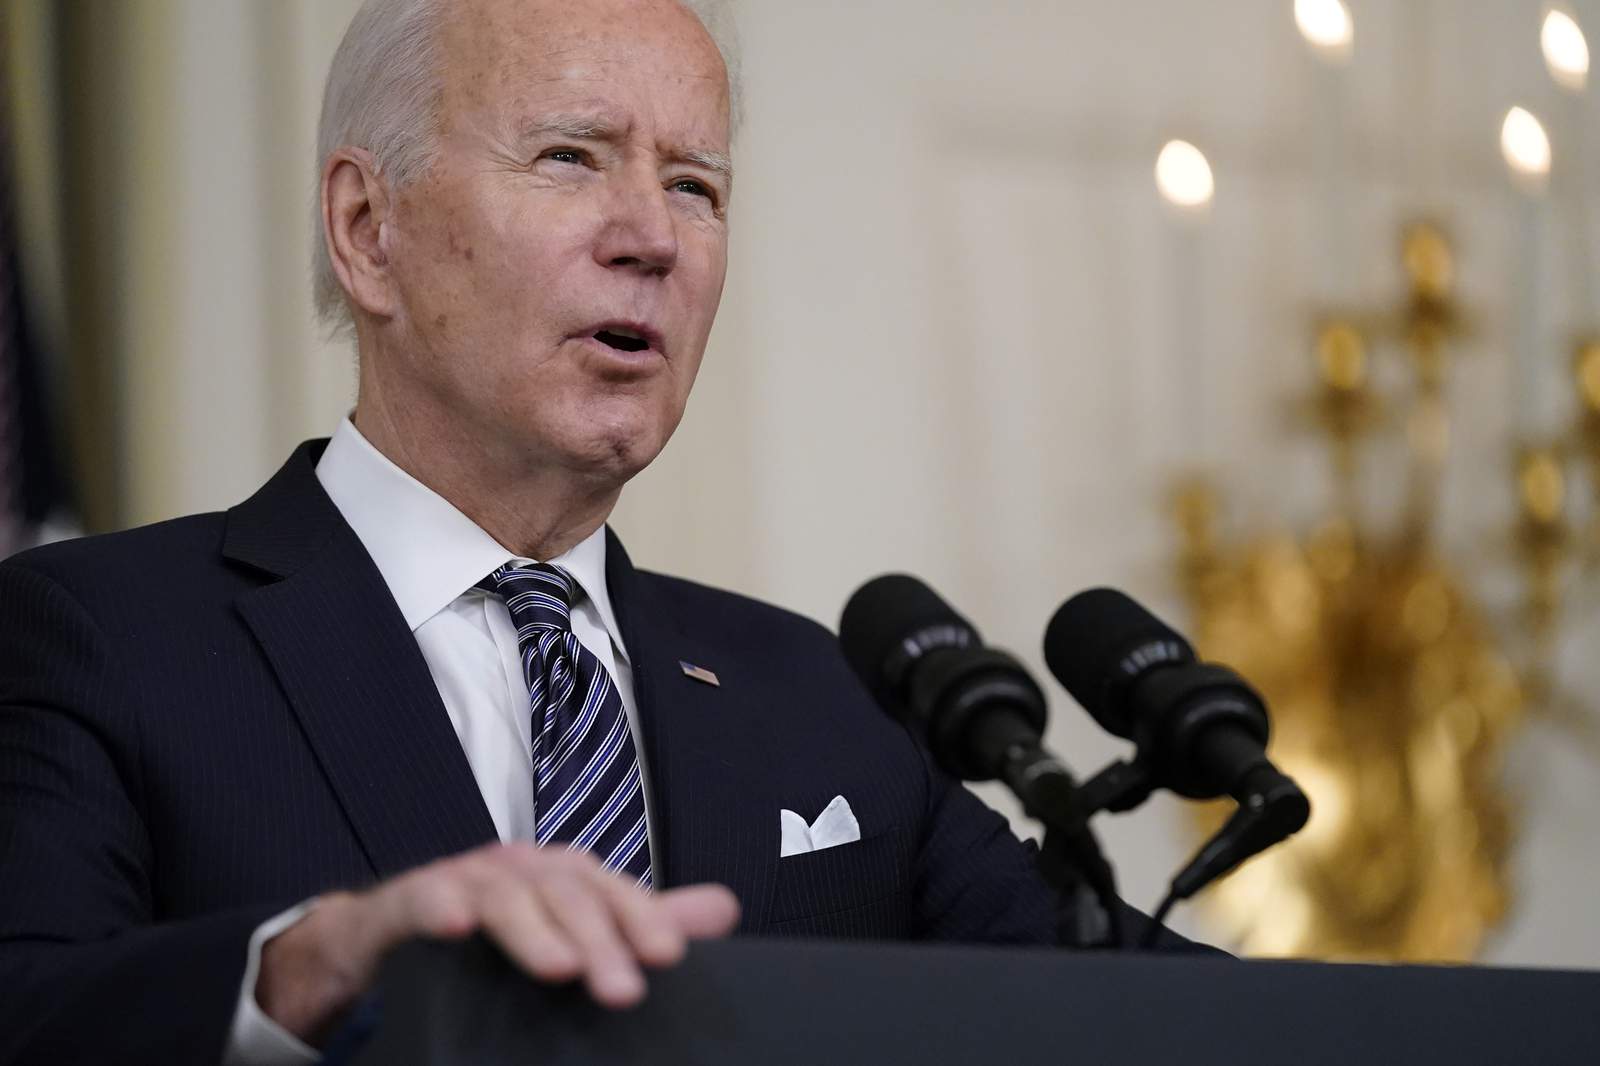 LIVE STREAM: President Biden provides update on US COVID vaccinations